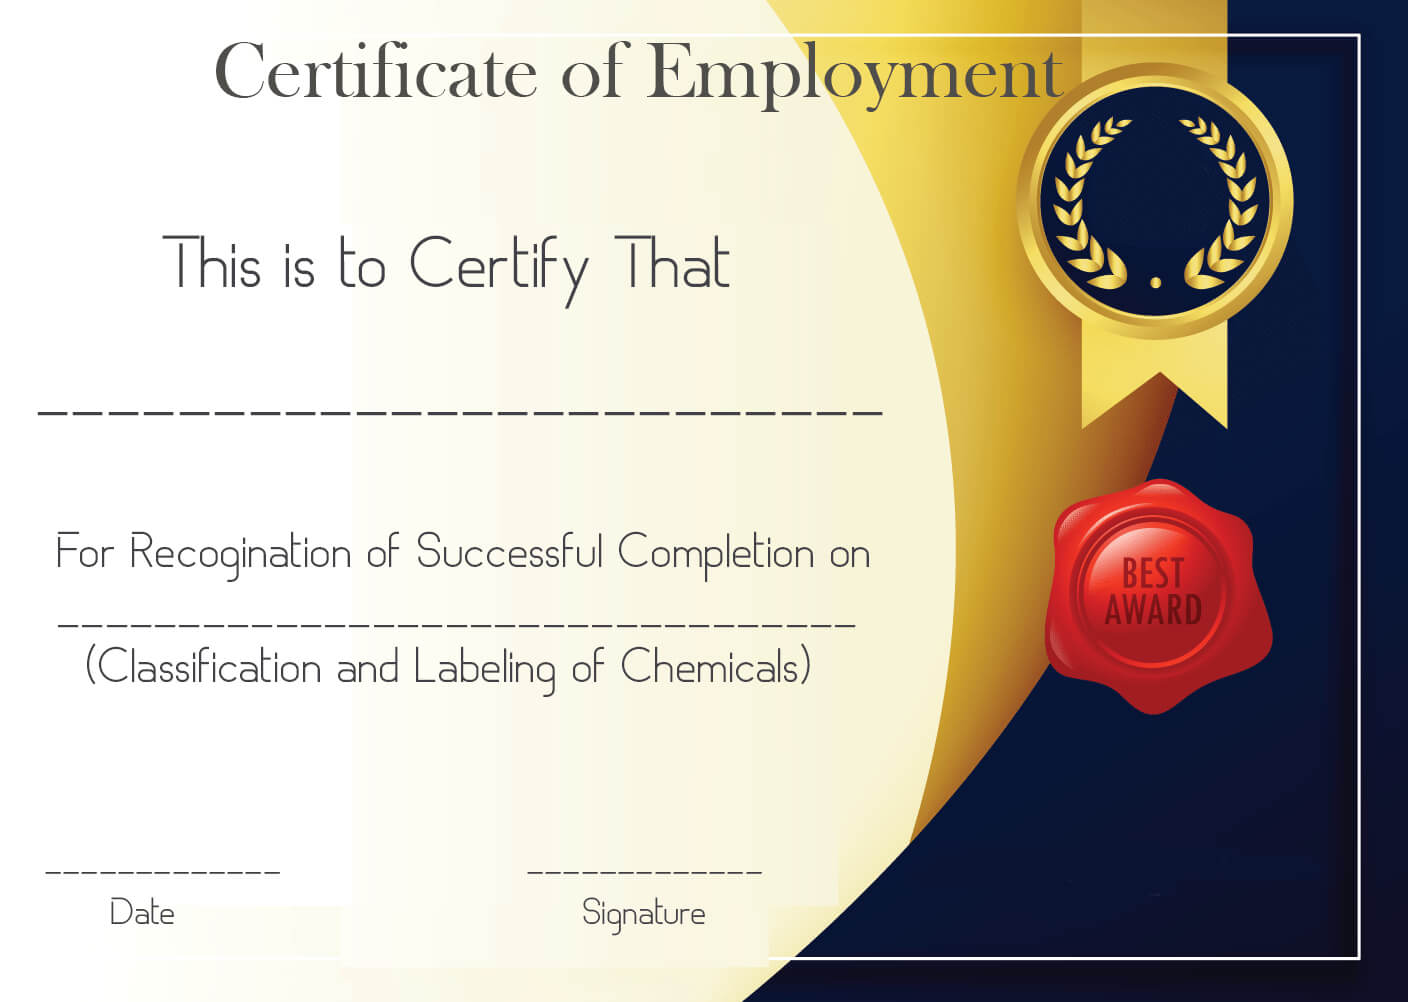 Free Sample Certificate Of Employment Template | Certificate Within Template Of Certificate Of Employment